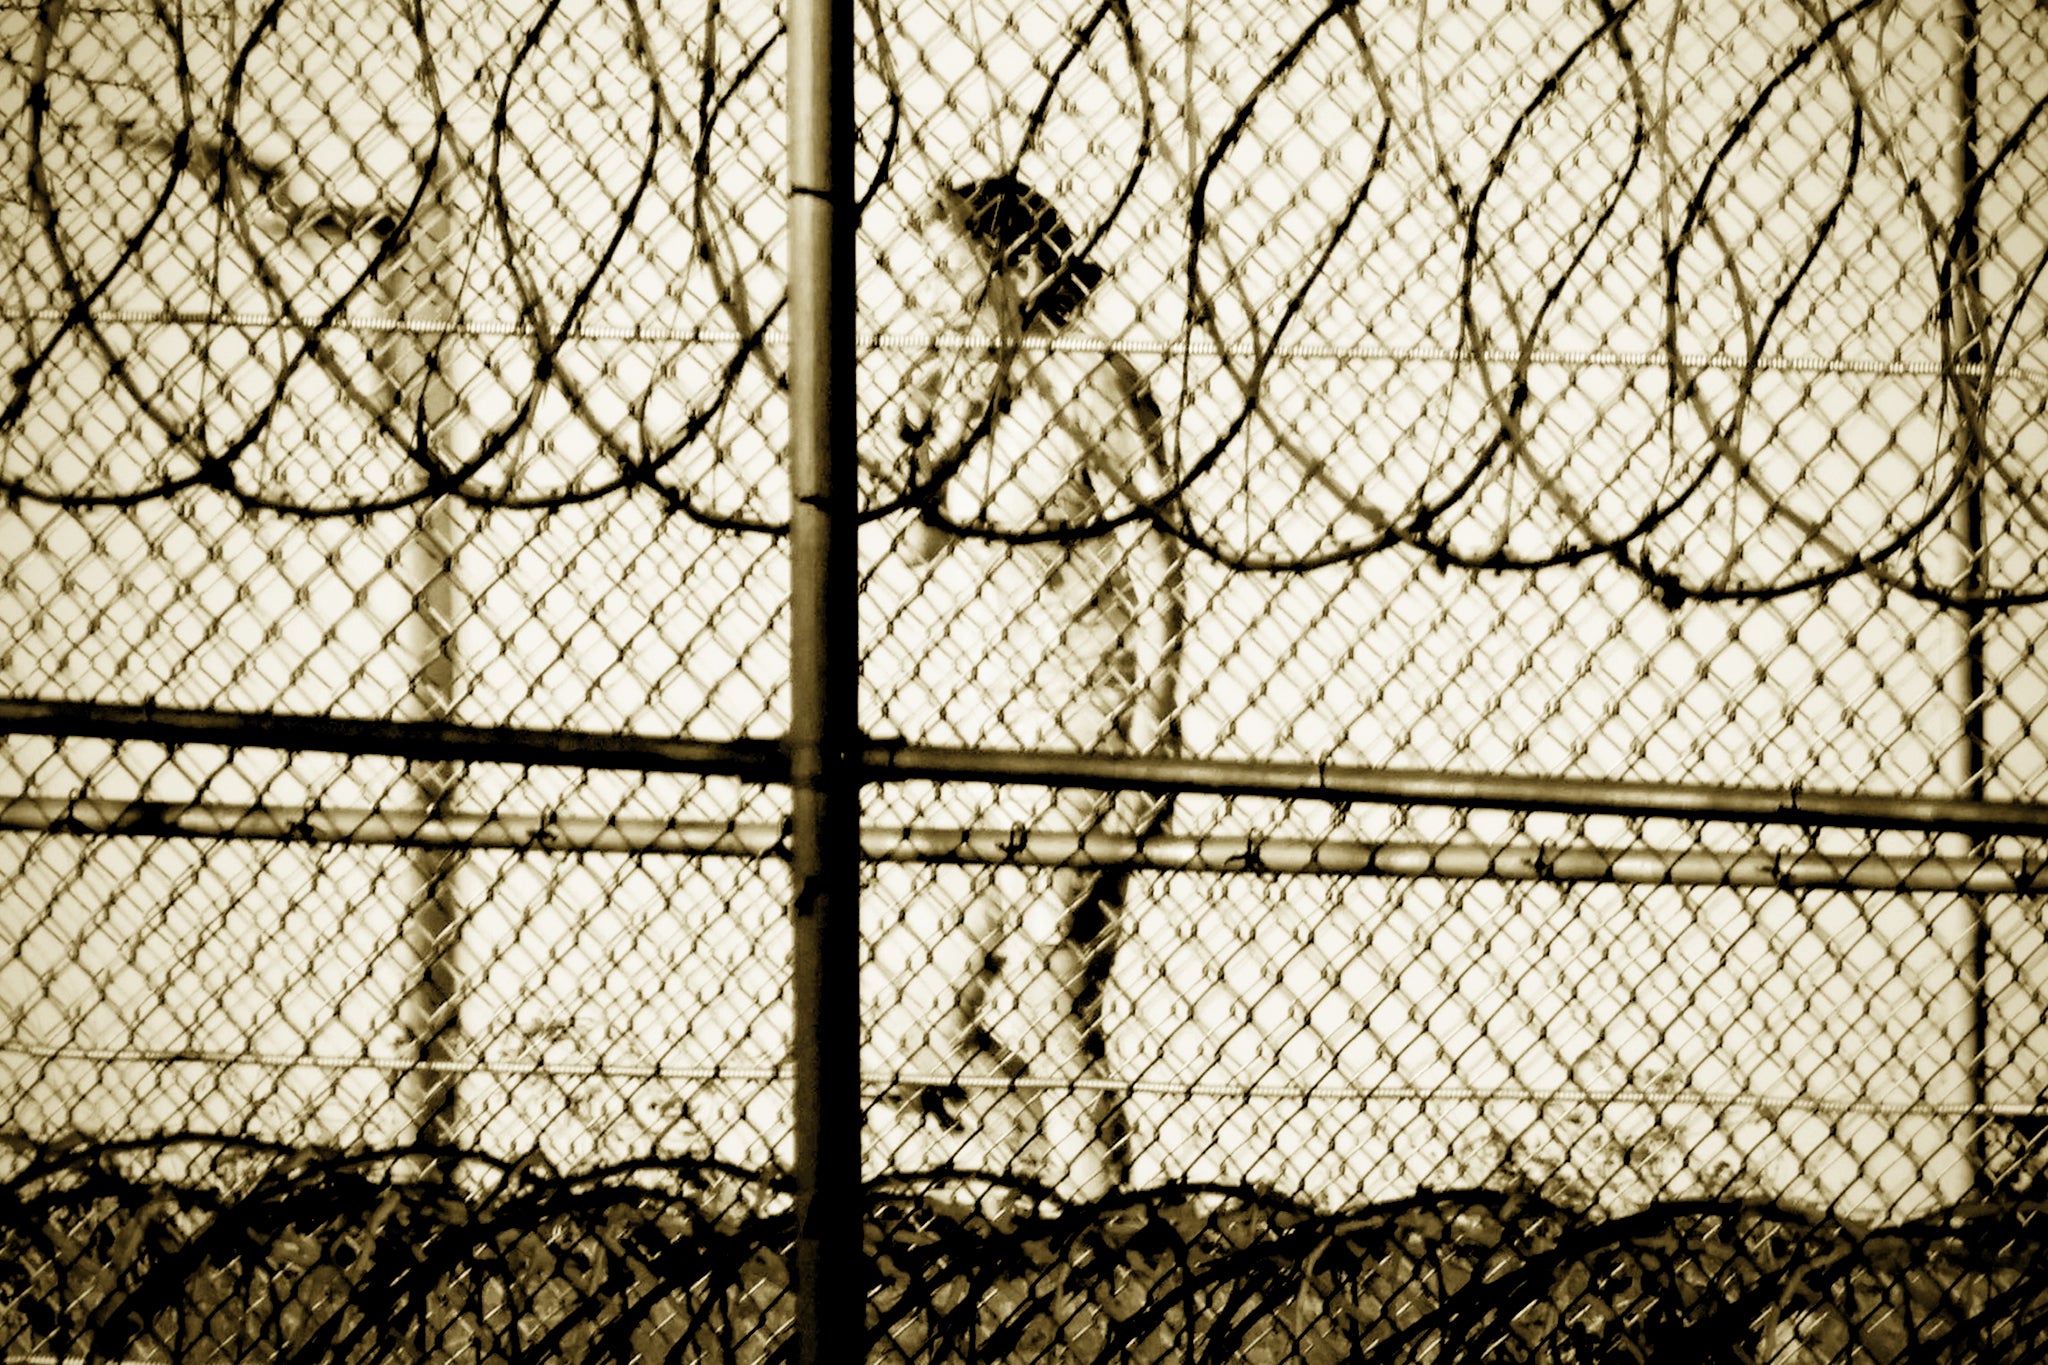 Convicted sex trafficker Ghislaine Maxwell, pictured exercising inside the fences of her Tallahassee prison, is serving a 20-year sentence